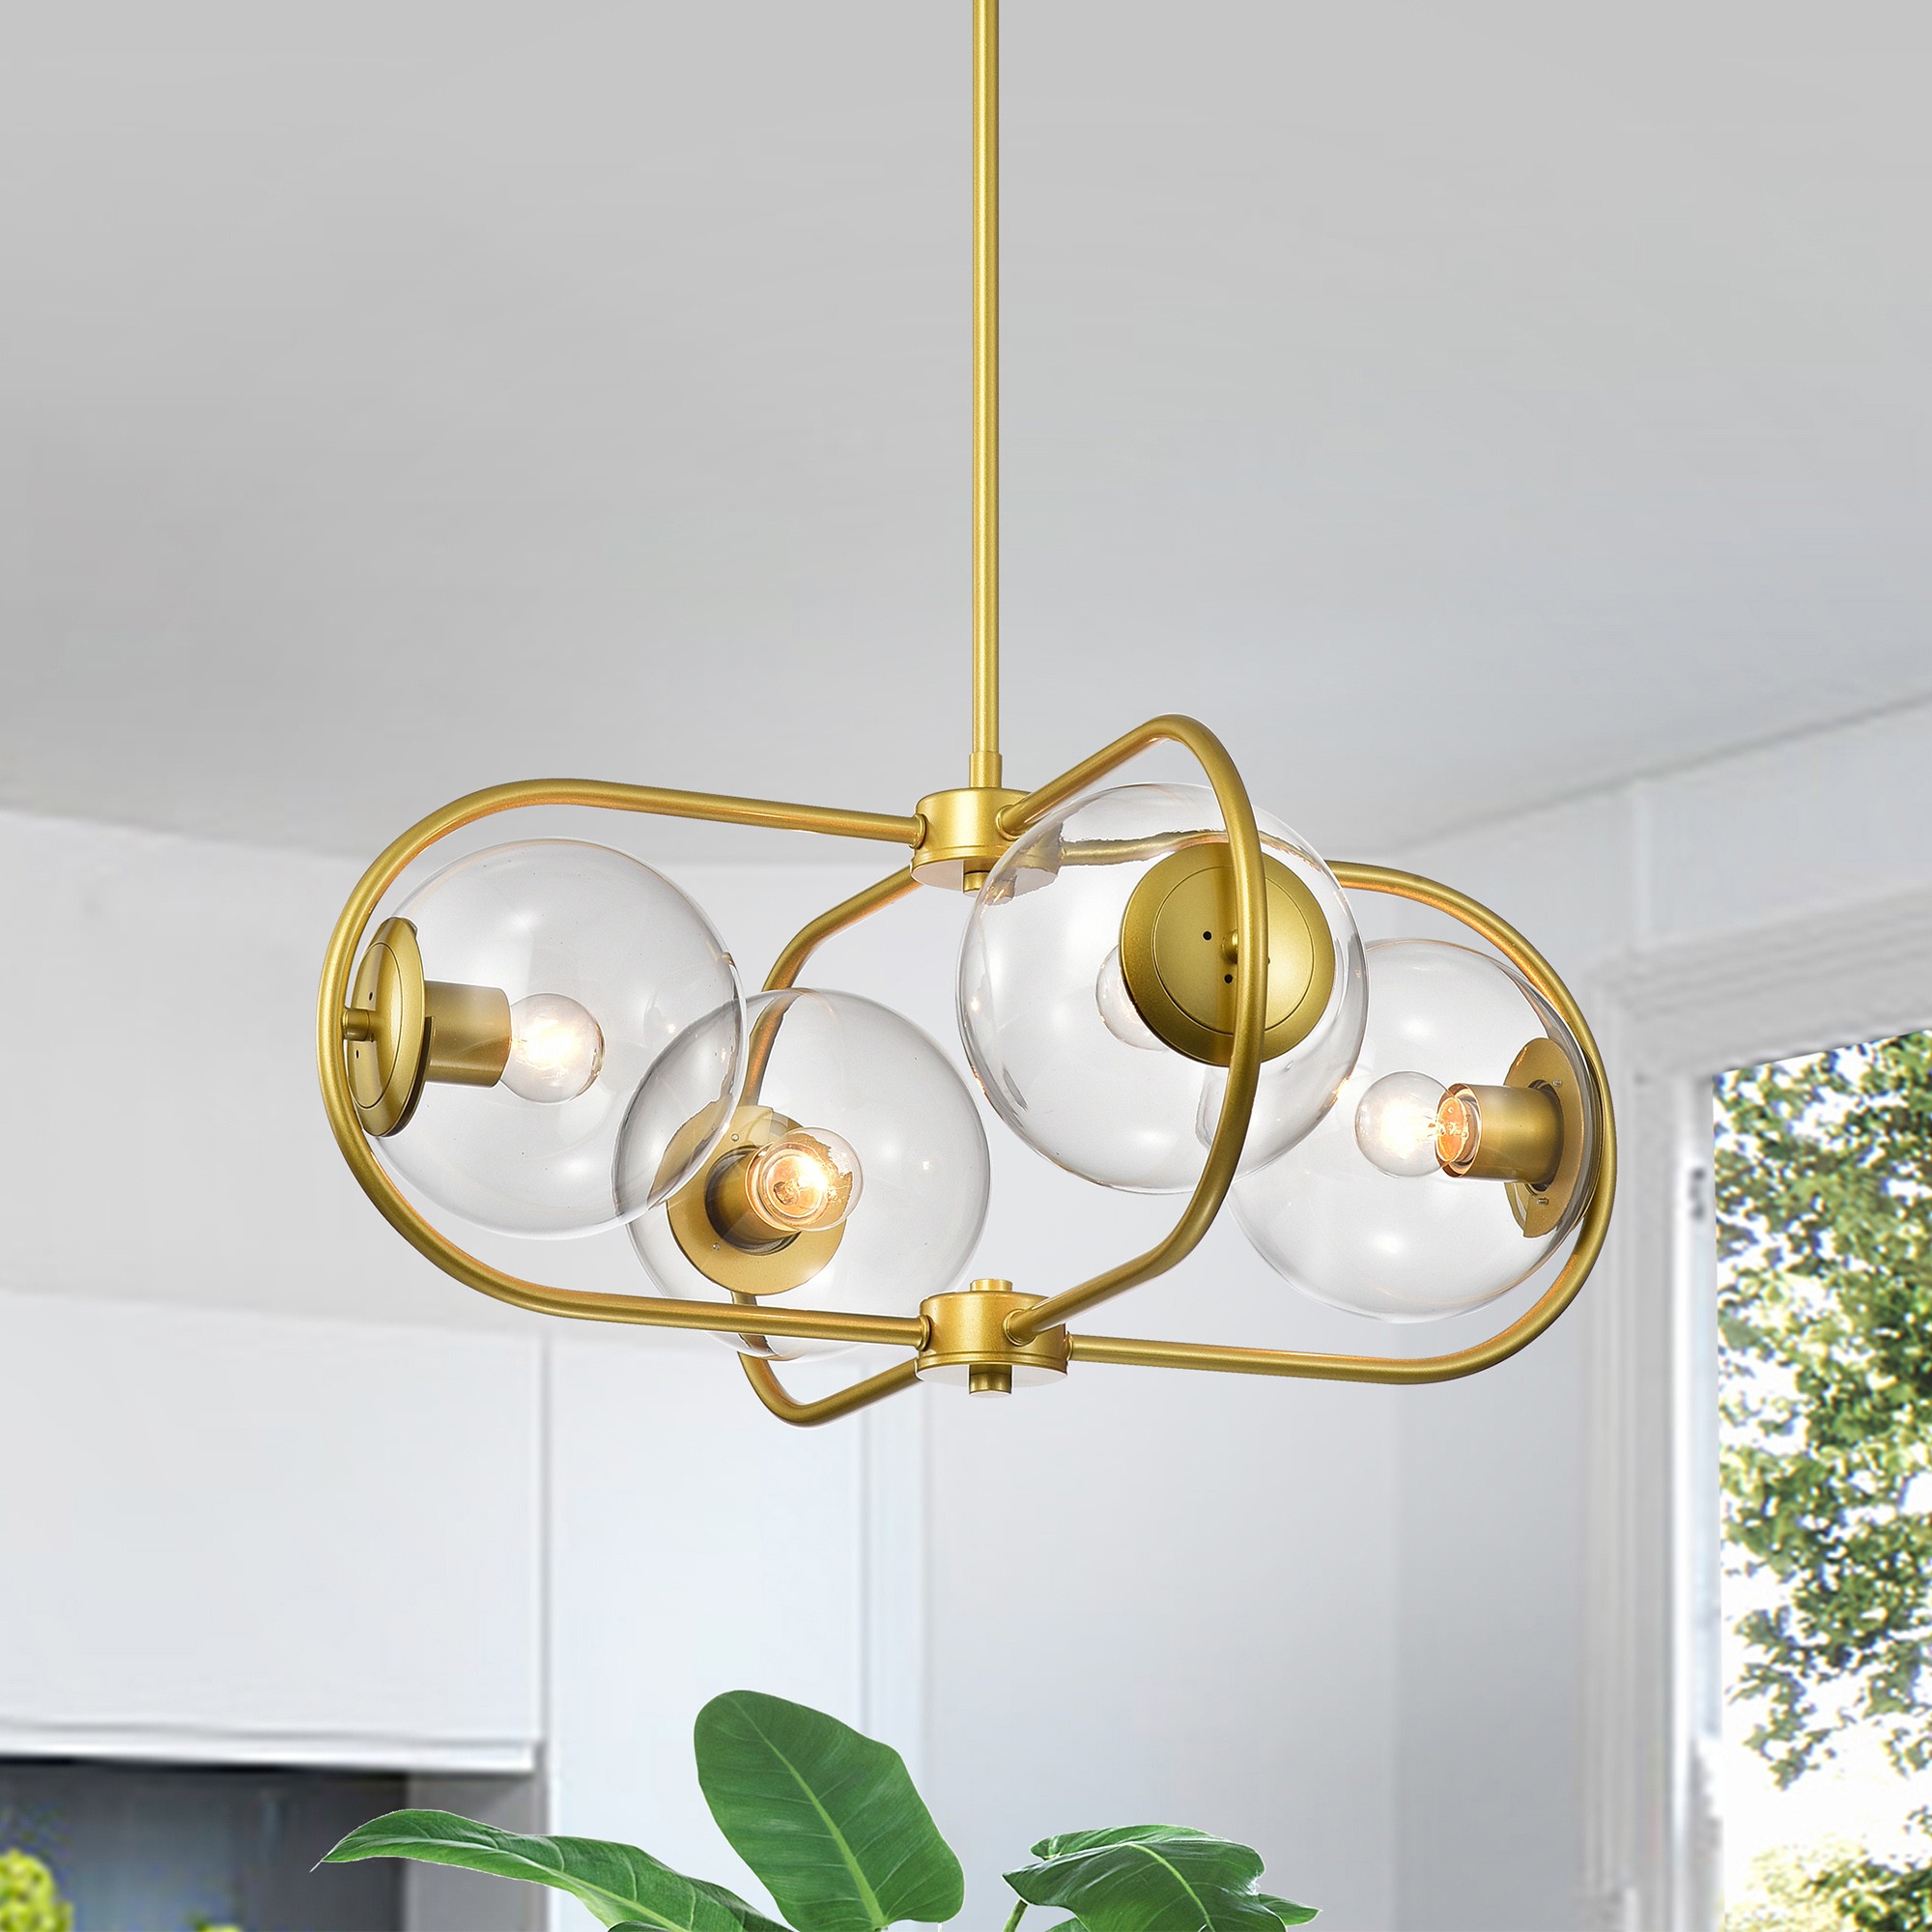 Keeray 24 in. 4-Light Indoor Gold Finish Chandelier with Light Kit